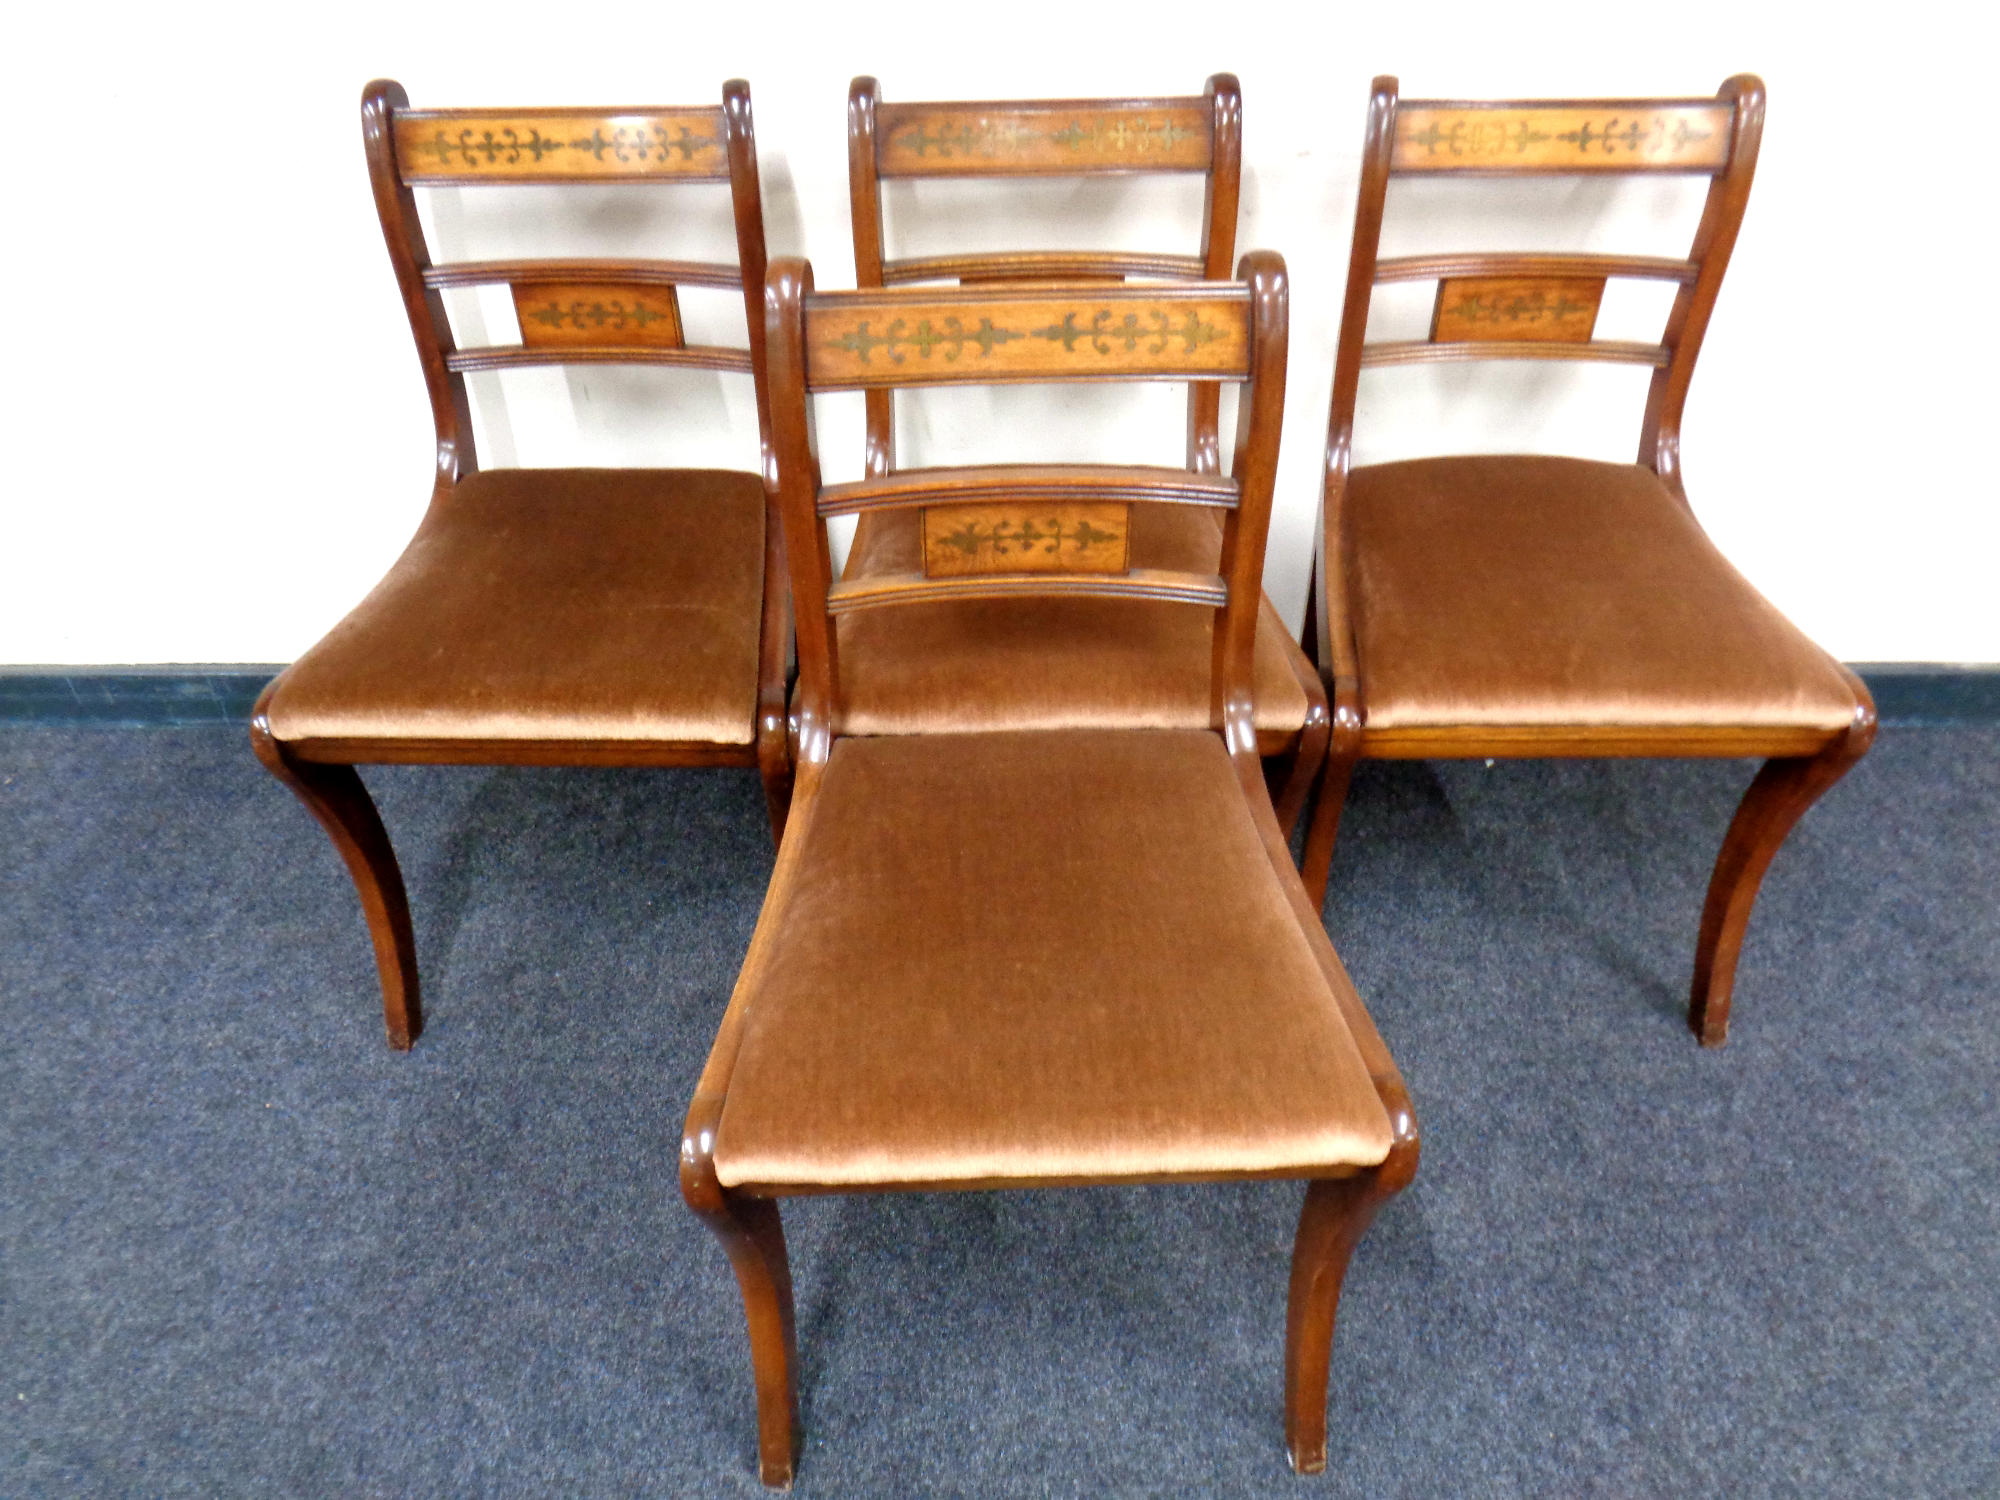 A set of four Reprodux Regency style dining chairs